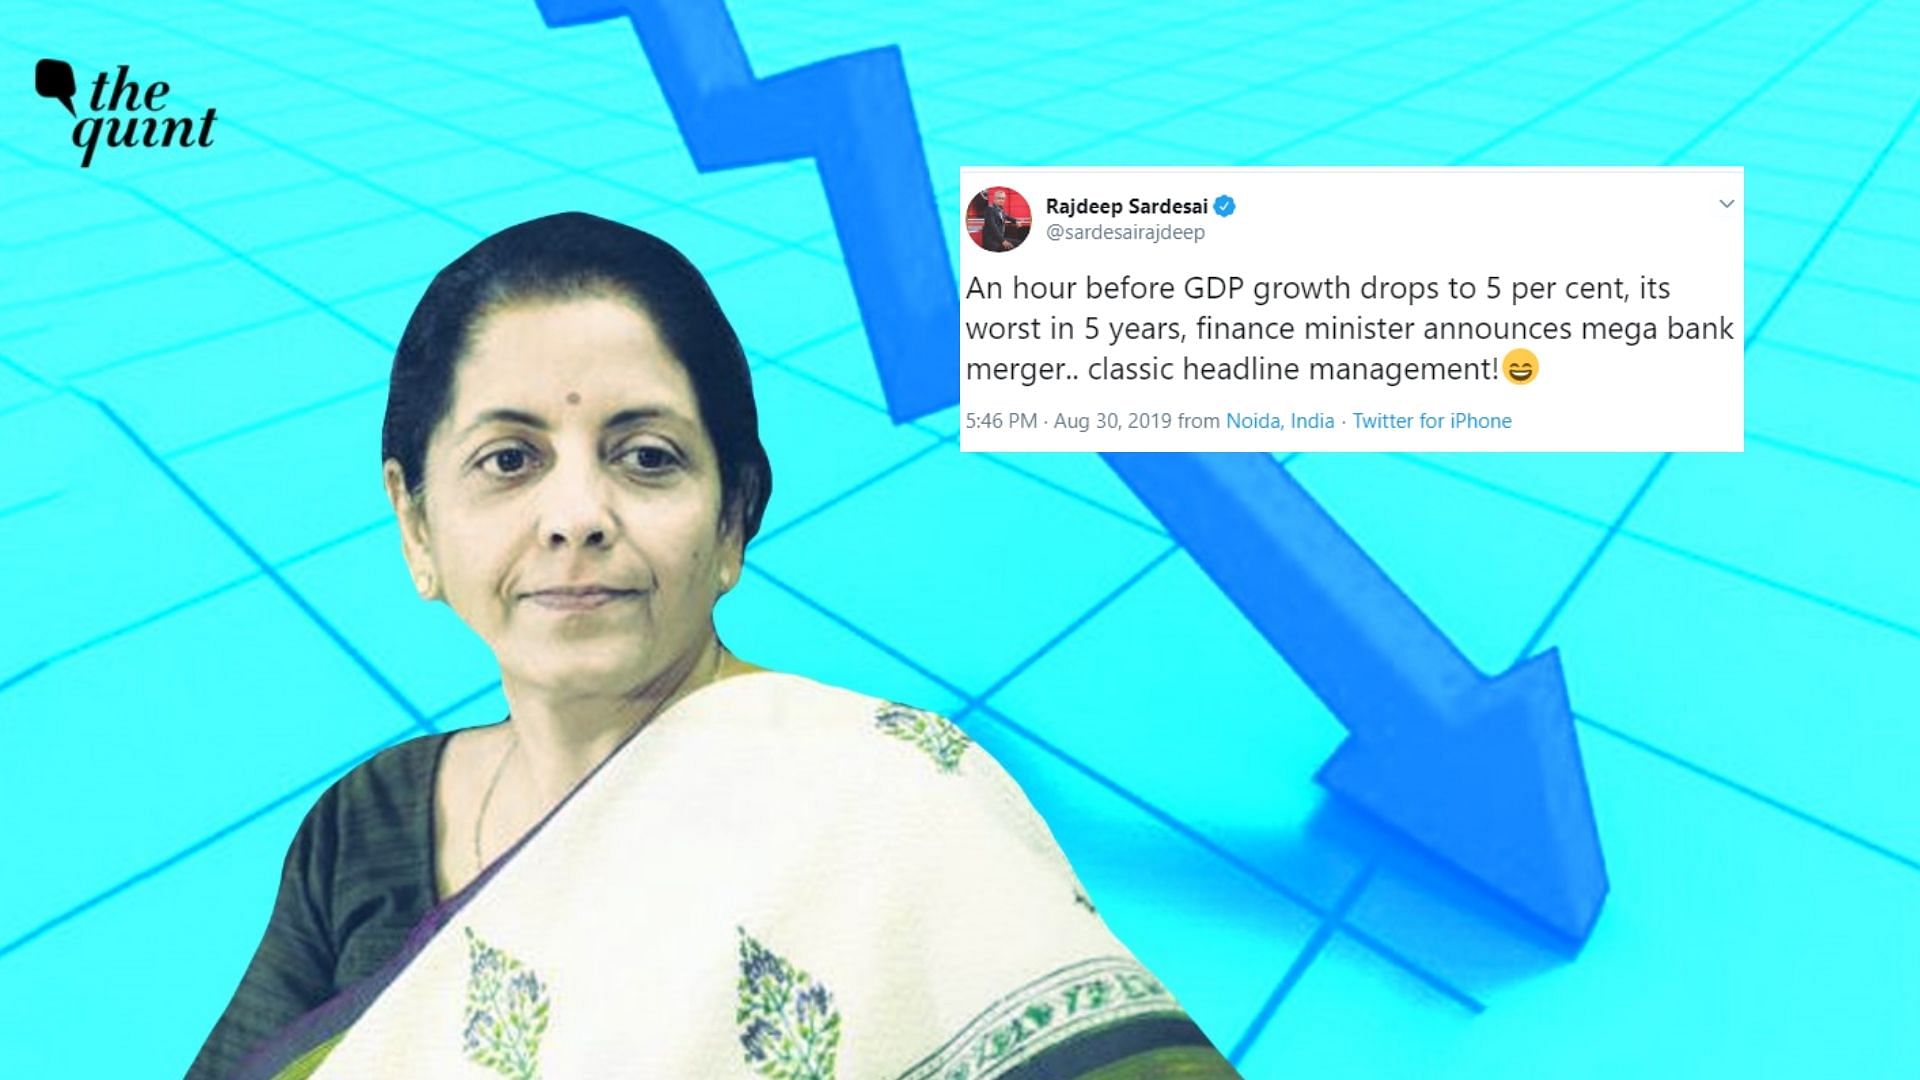 Twitterati were quick to react to Sitharaman’s $5 trillion economy pitch after GDP crashed to near 7-year low.